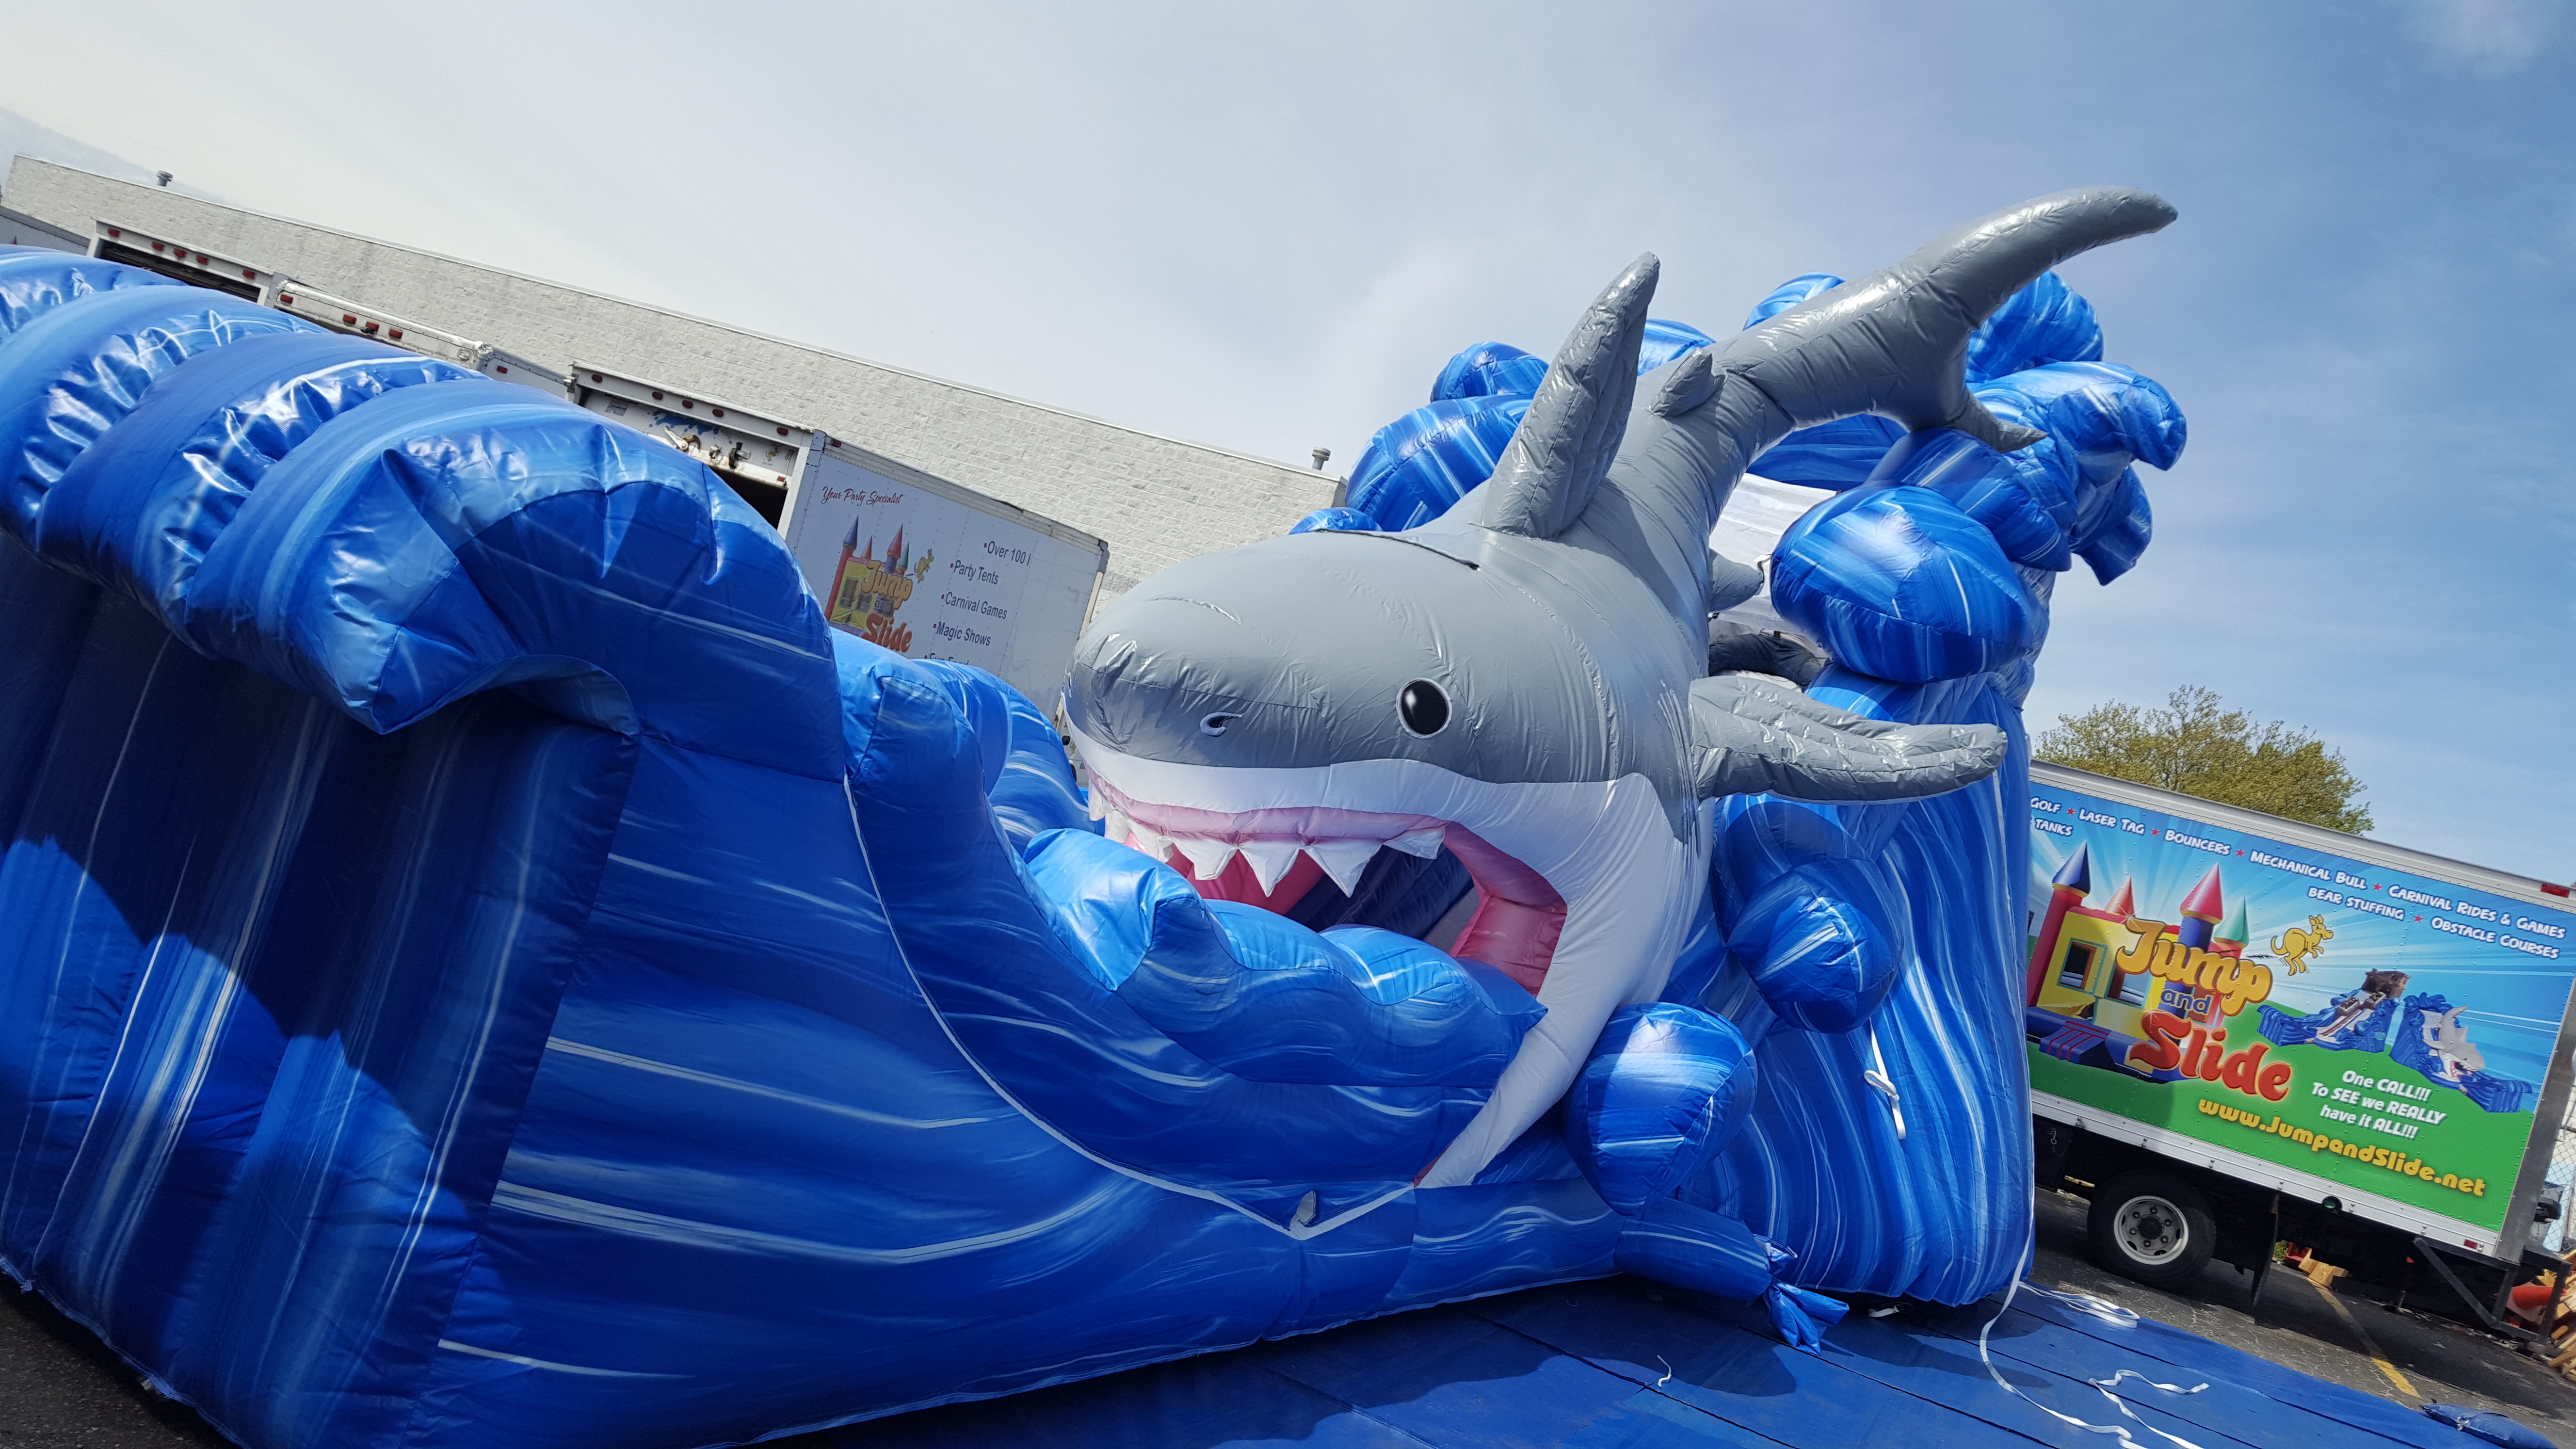 Mako Shark water slide rental.Looking for something different?
Jump And Slide has the largest selection of bouncer rentals. water slide rentals, tent rentals,mechanical bull rentals,mini golf rentals and so much more.